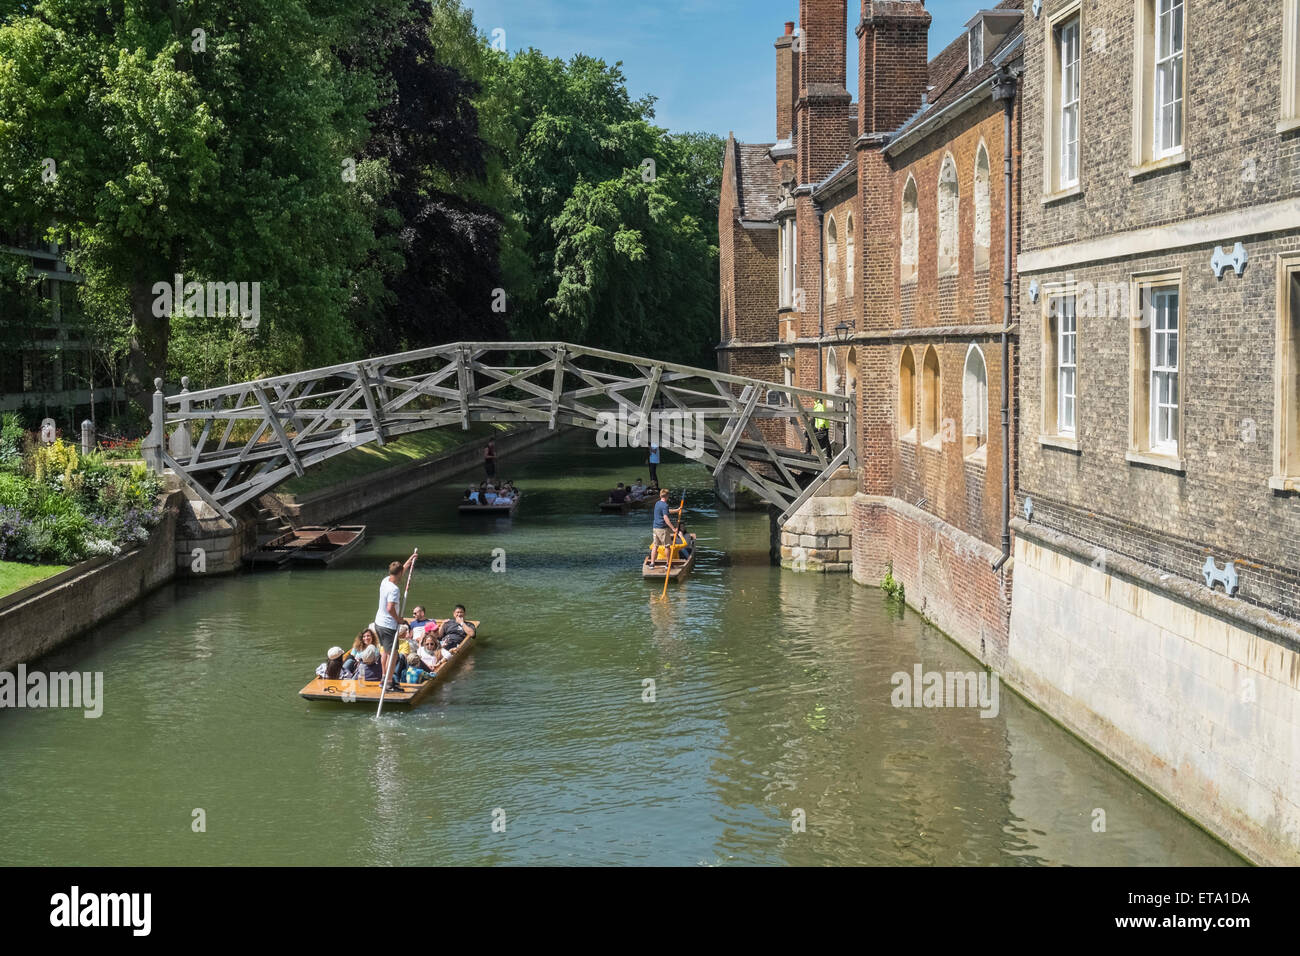 Punting on River Cam, near Mathematical Bridge, Cambridge, UK. The bridge connects 2 parts of Queens College. Stock Photo